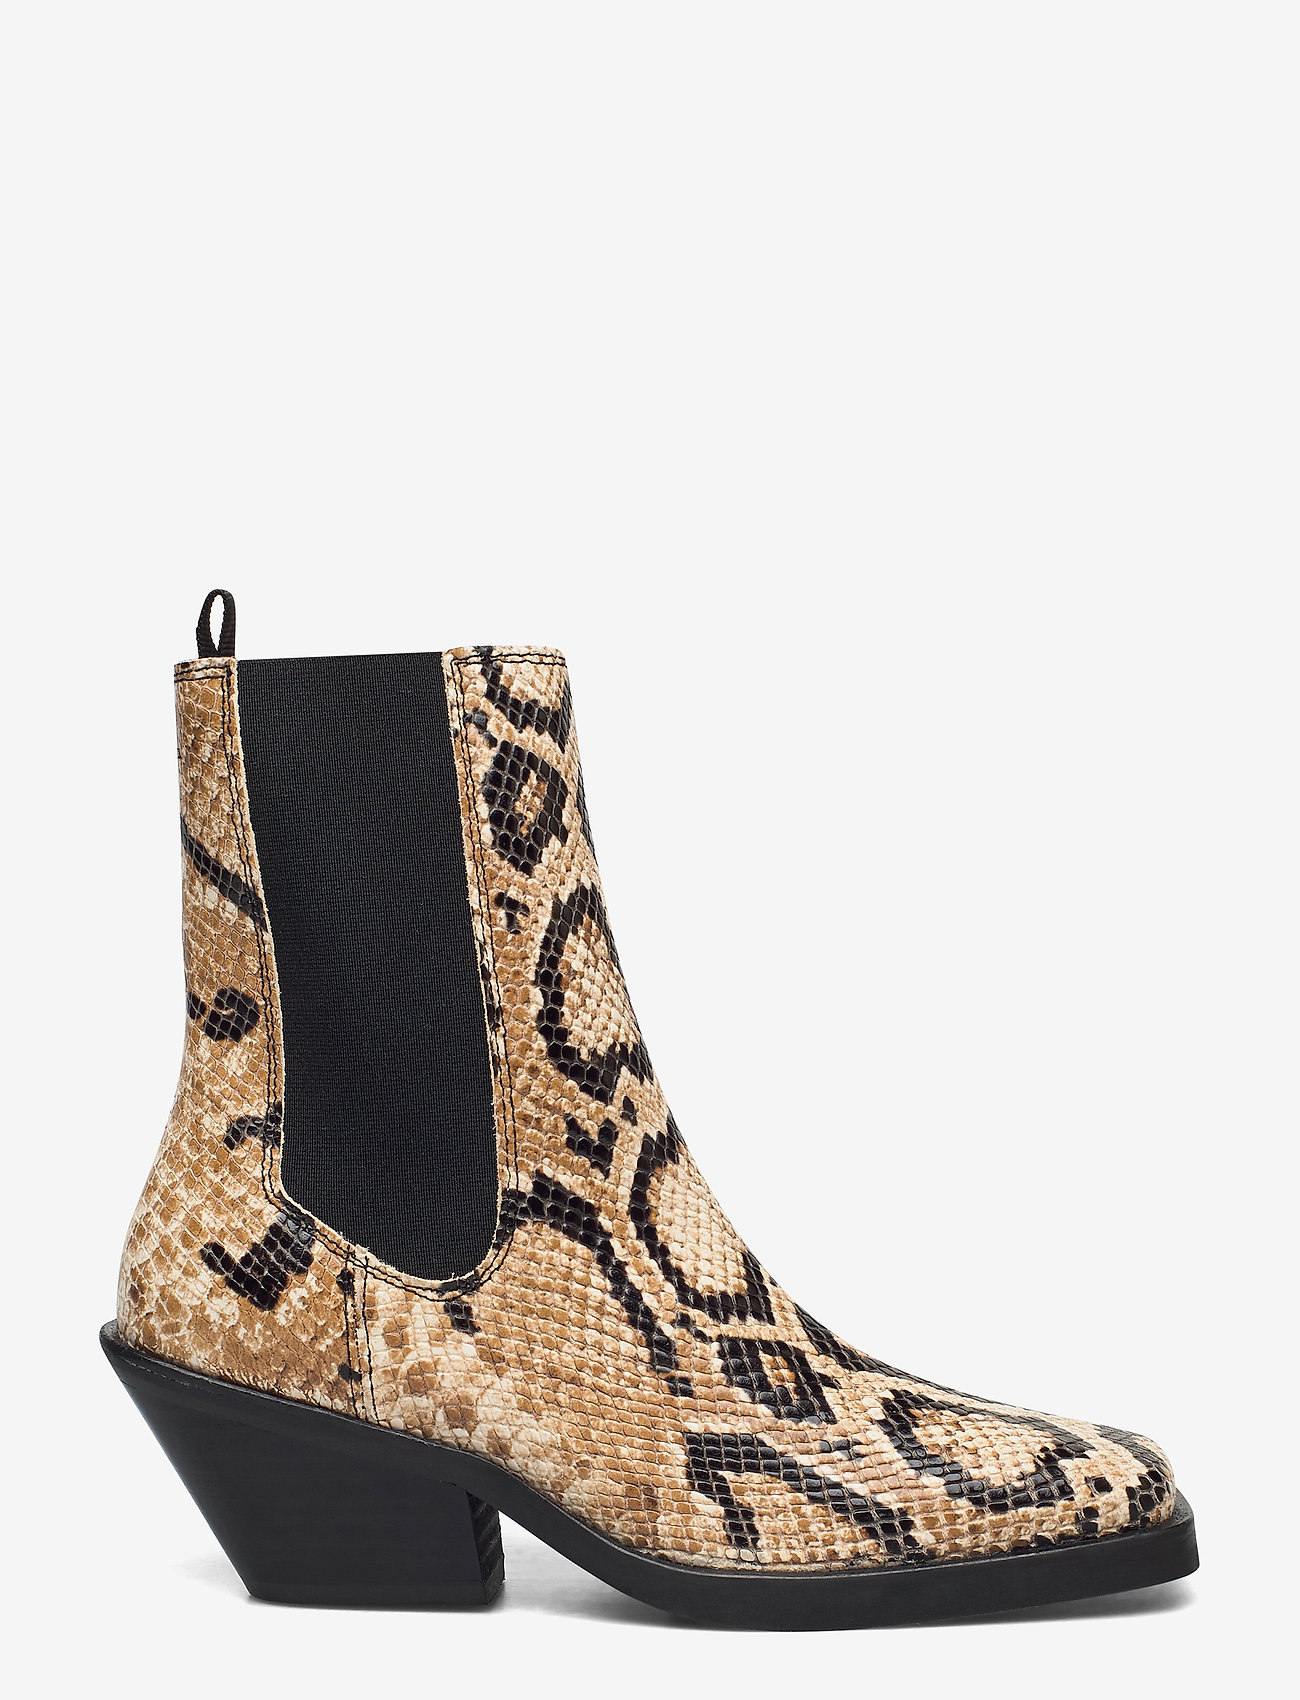 Selected Femme Slfava Snake Leather Chelseaoot - Boots | Boozt.com